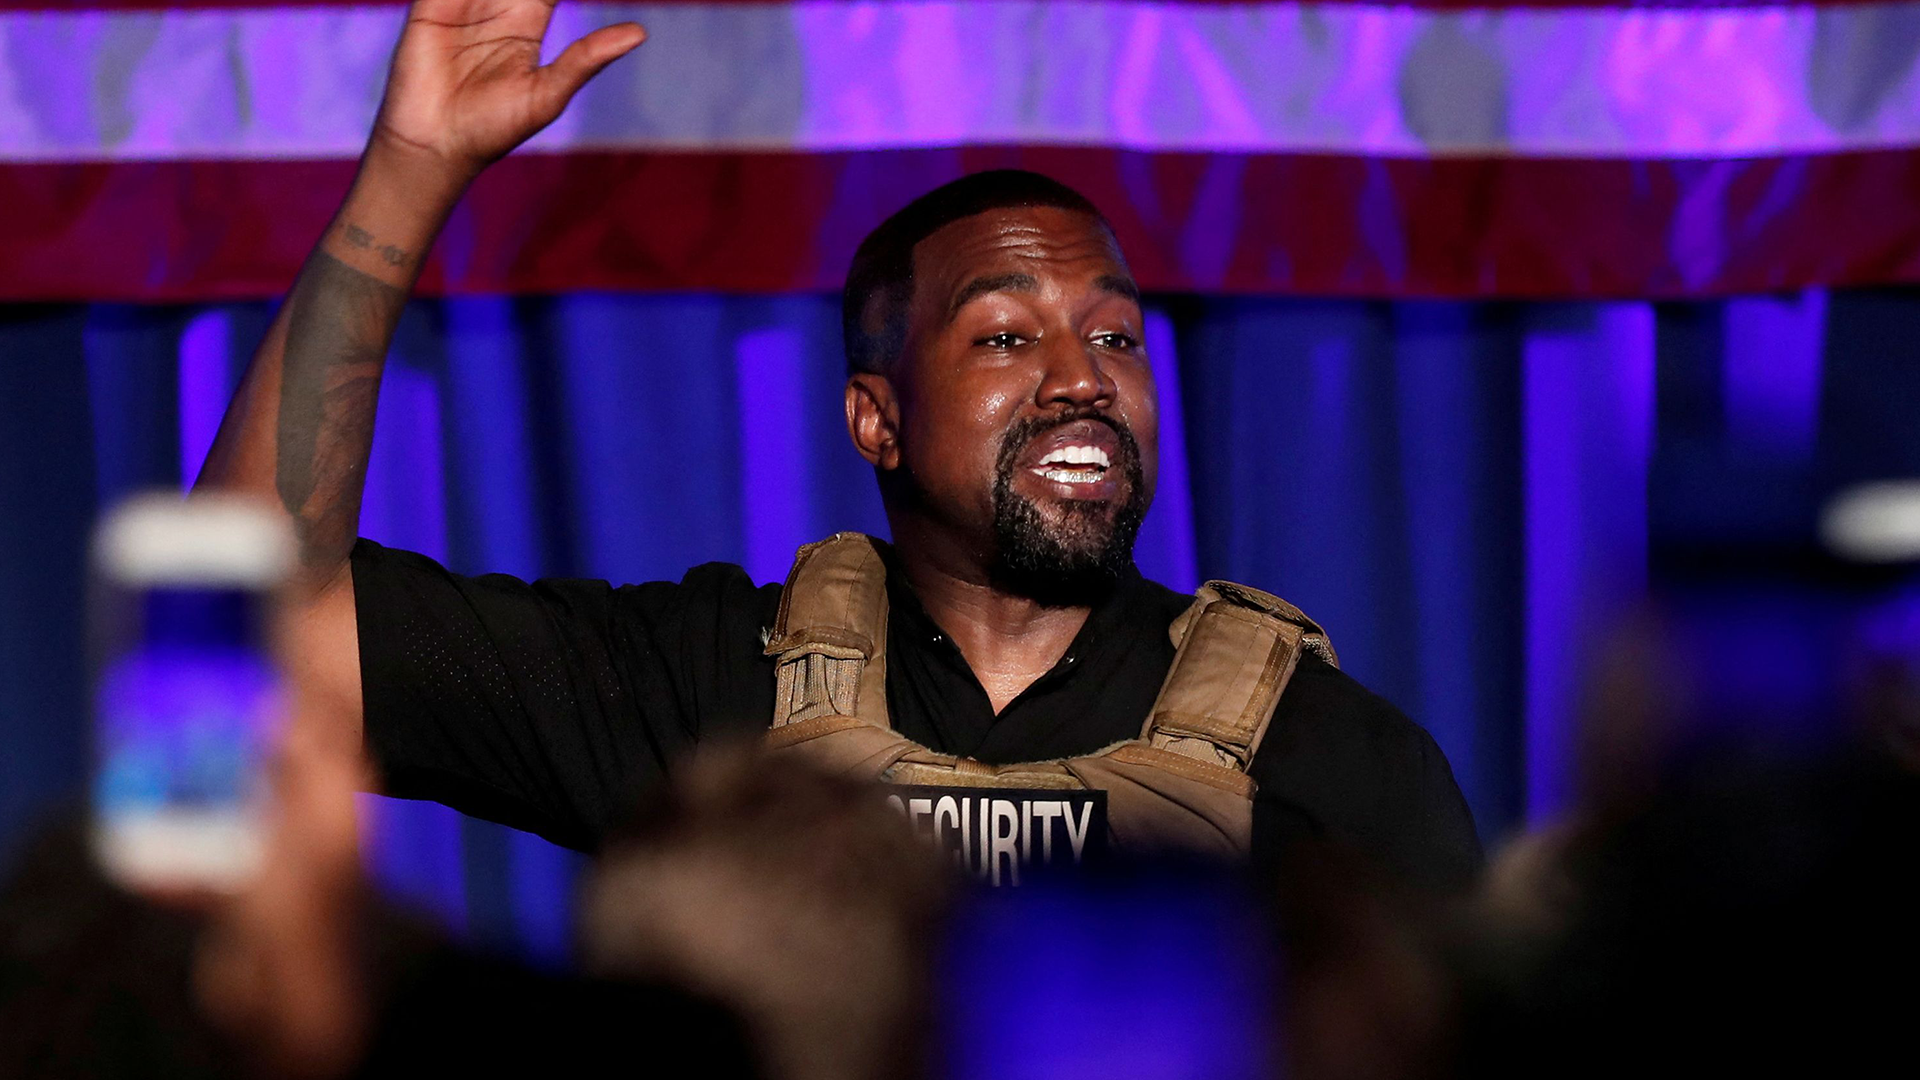 Kanye West's Instagram Account Restricted for Policy Violations